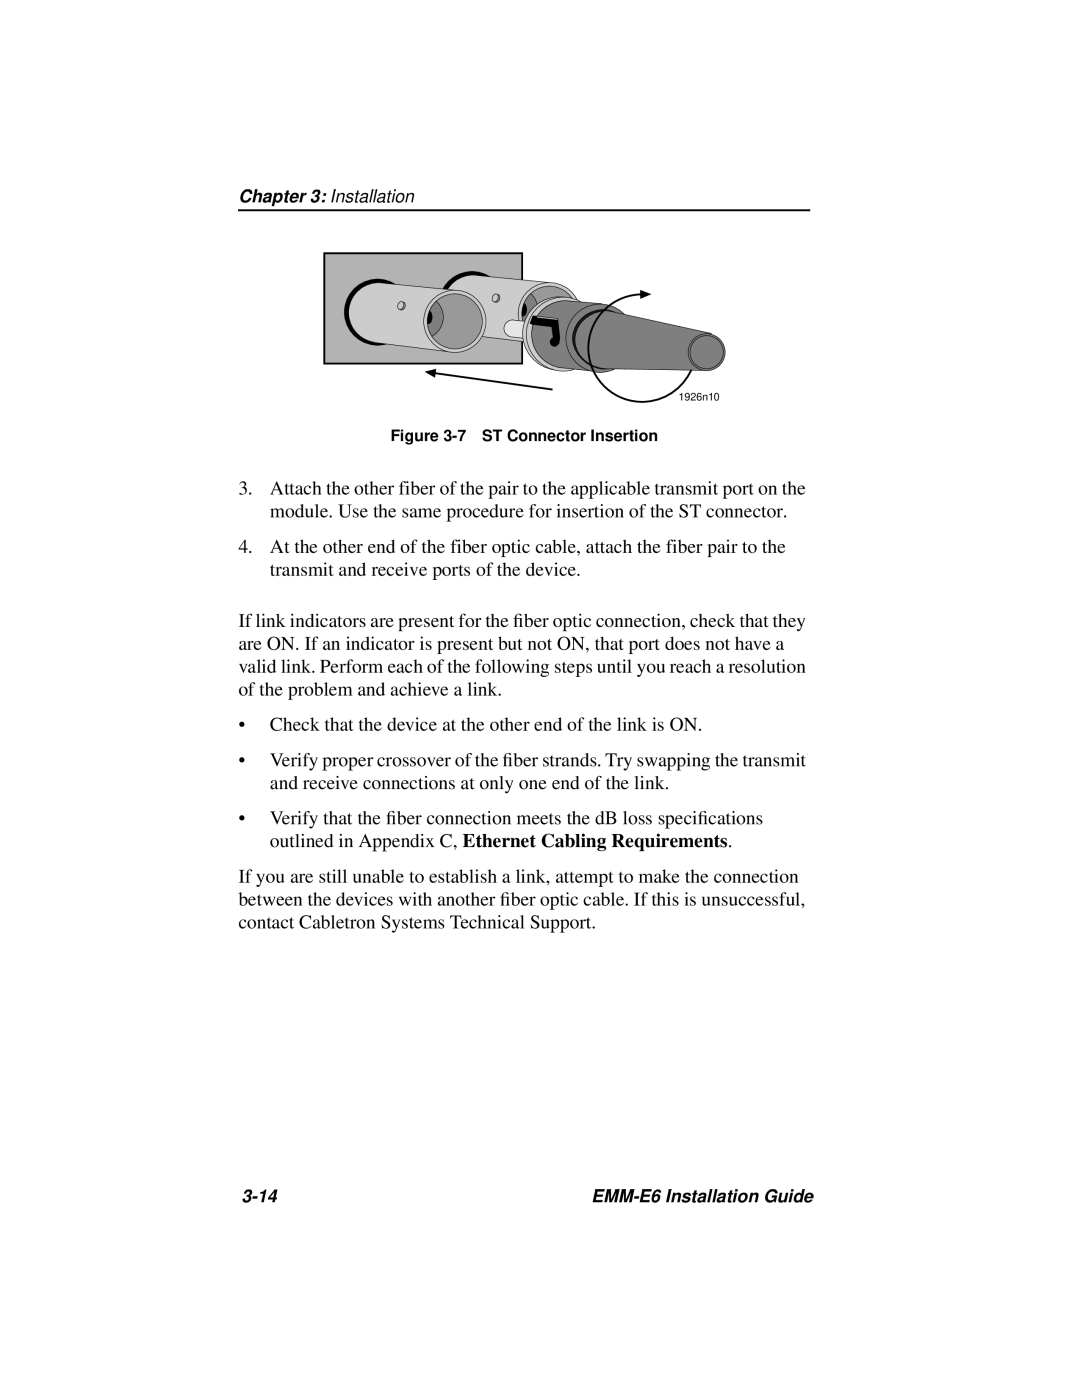 Cabletron Systems EMM-E6 manual Check that the device at the other end of the link is ON 